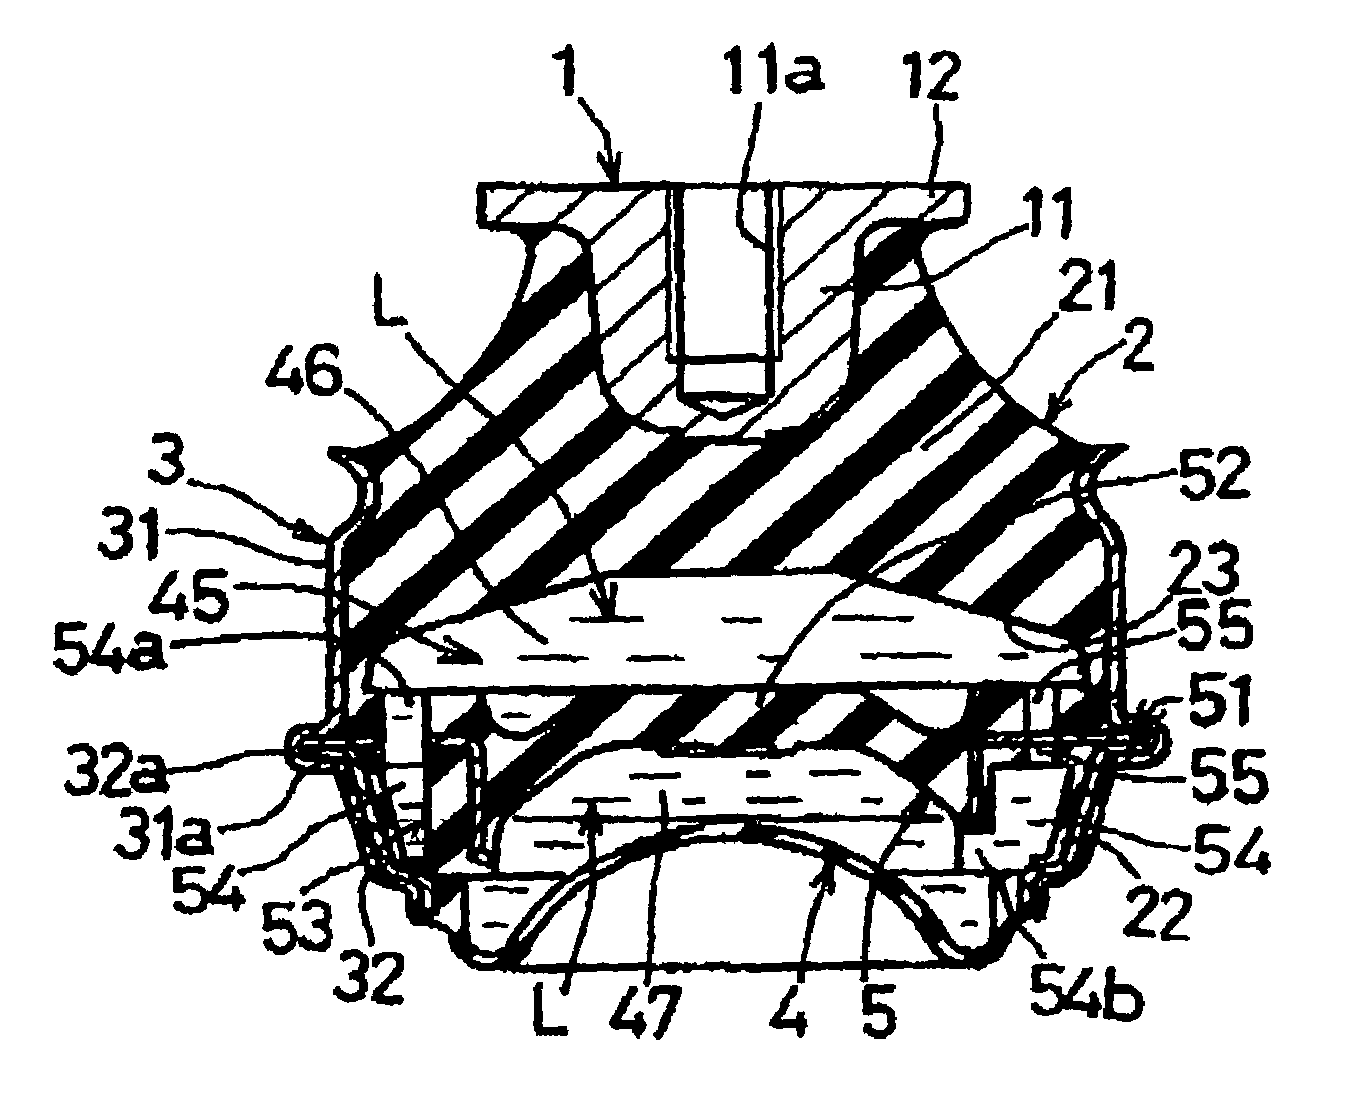 Fluid-filled vibration-damping device